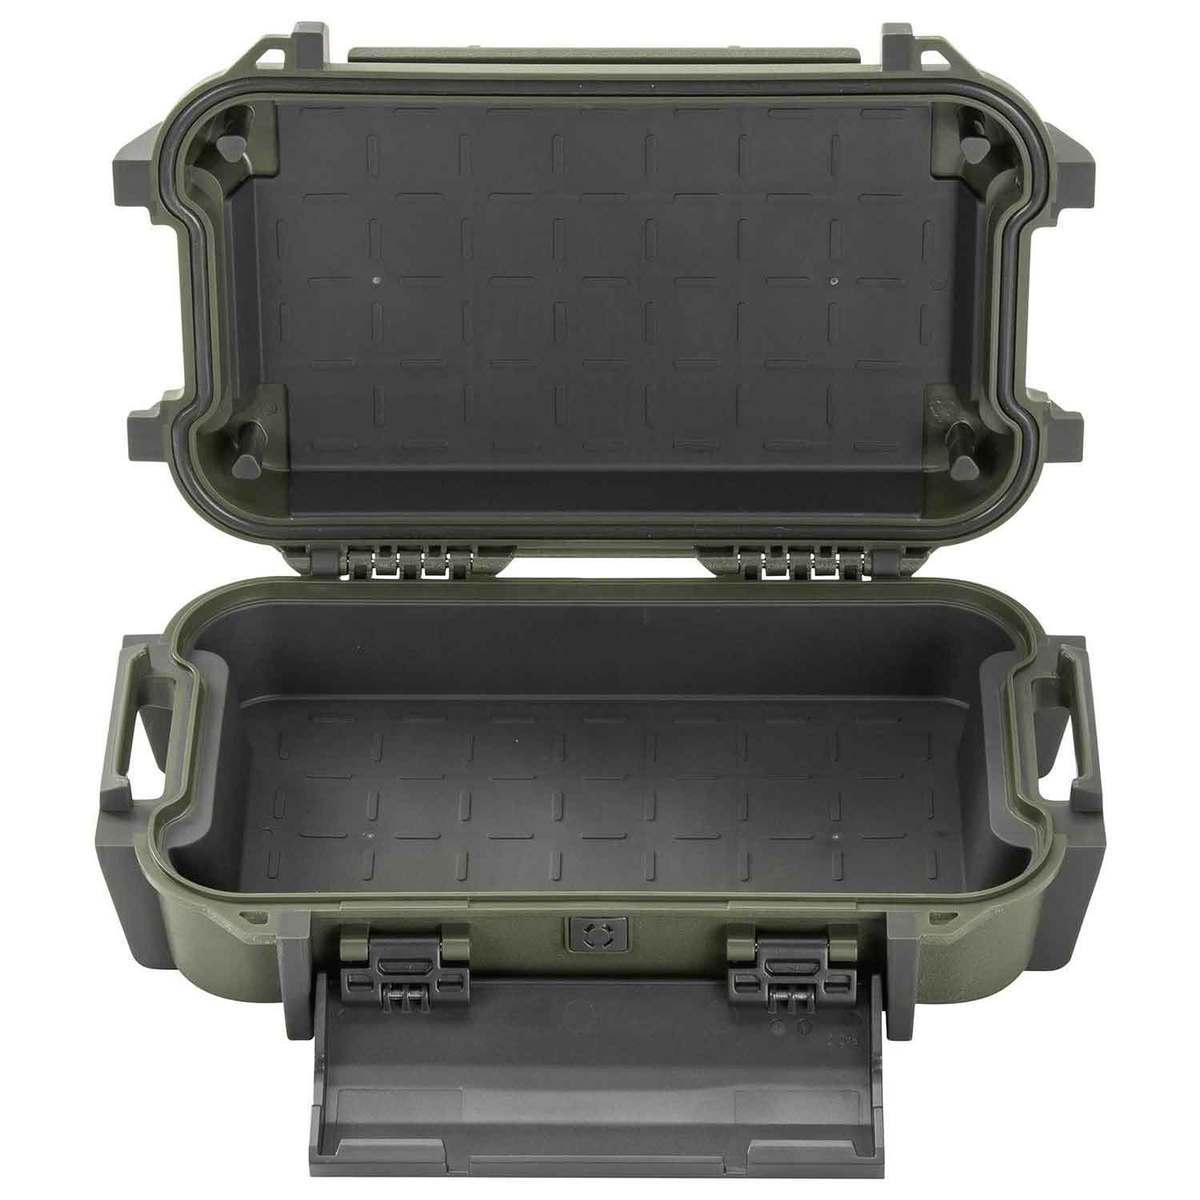 Pelican R40 Personal Utility Ruck Case - OD Green - OD Green 9.84in x 6